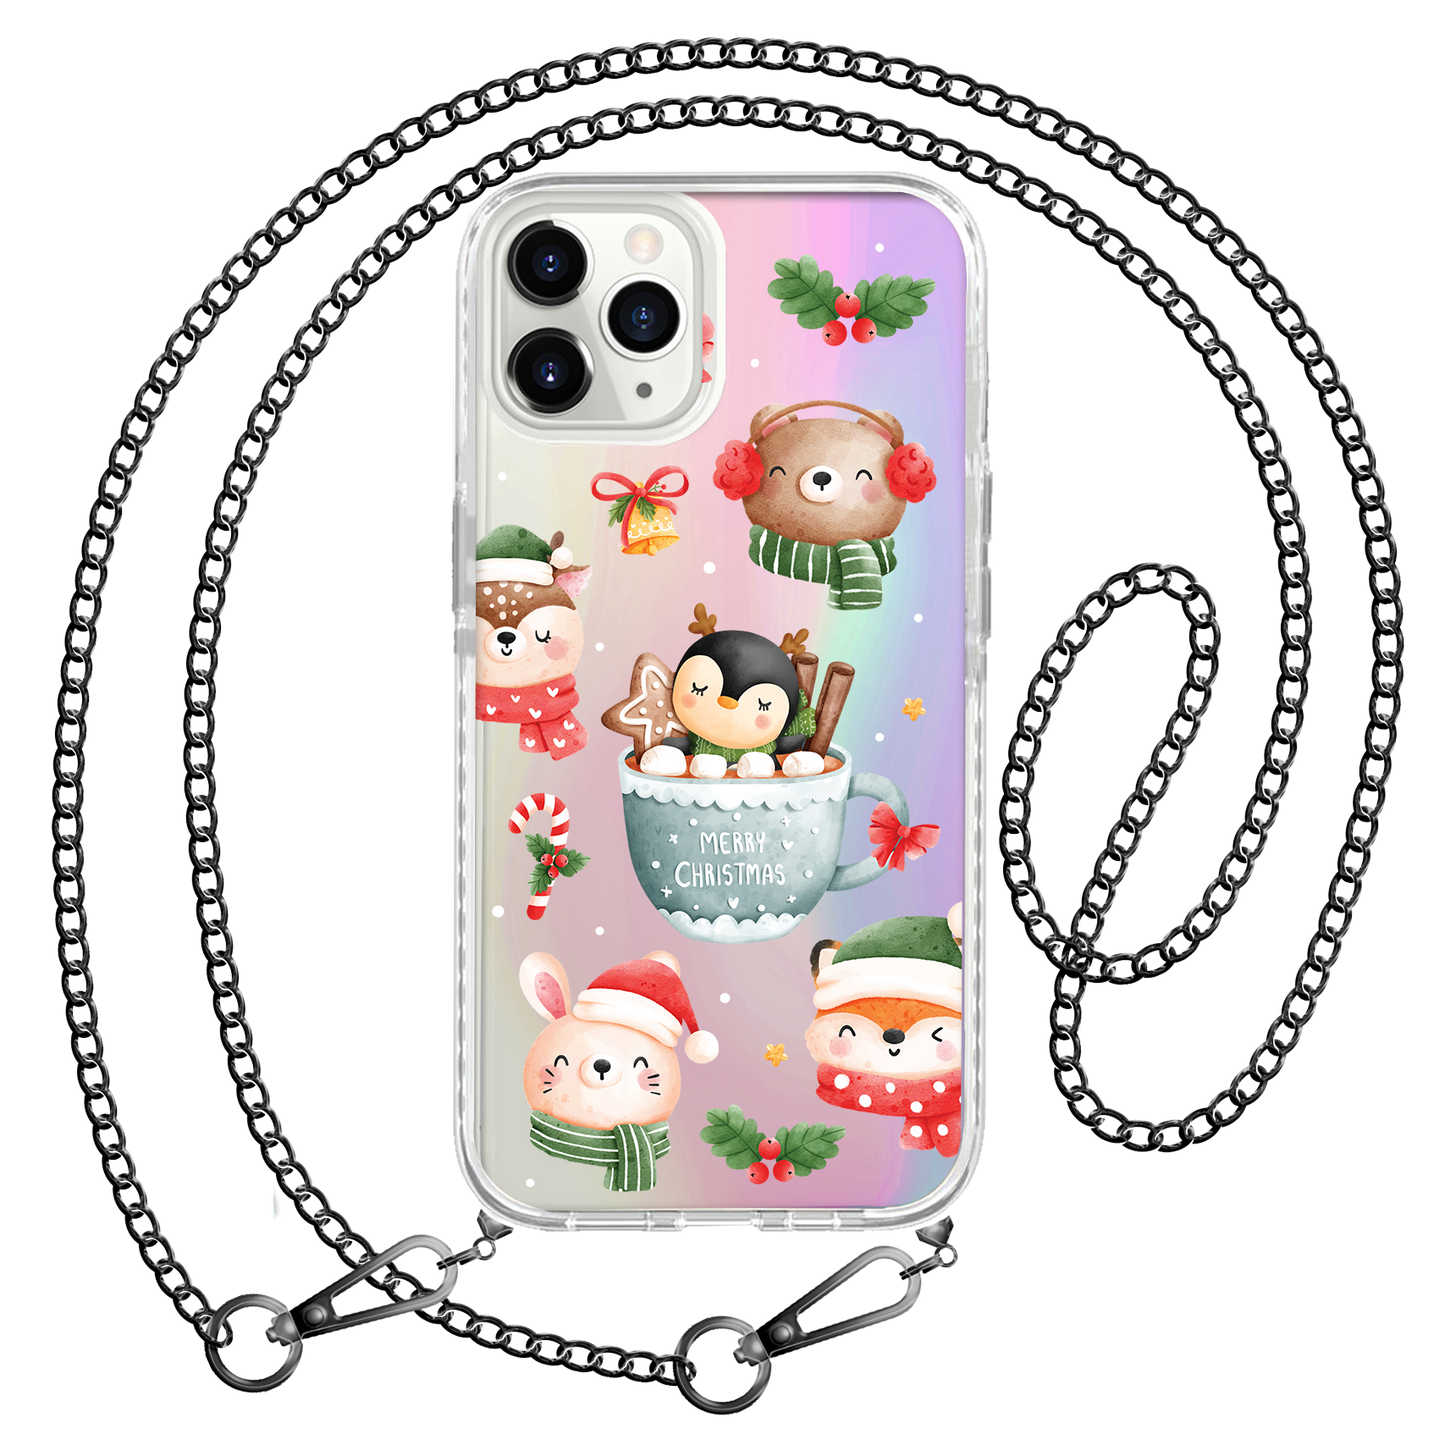 iPhone Rearguard Holo - Storybook Christmas 2.0